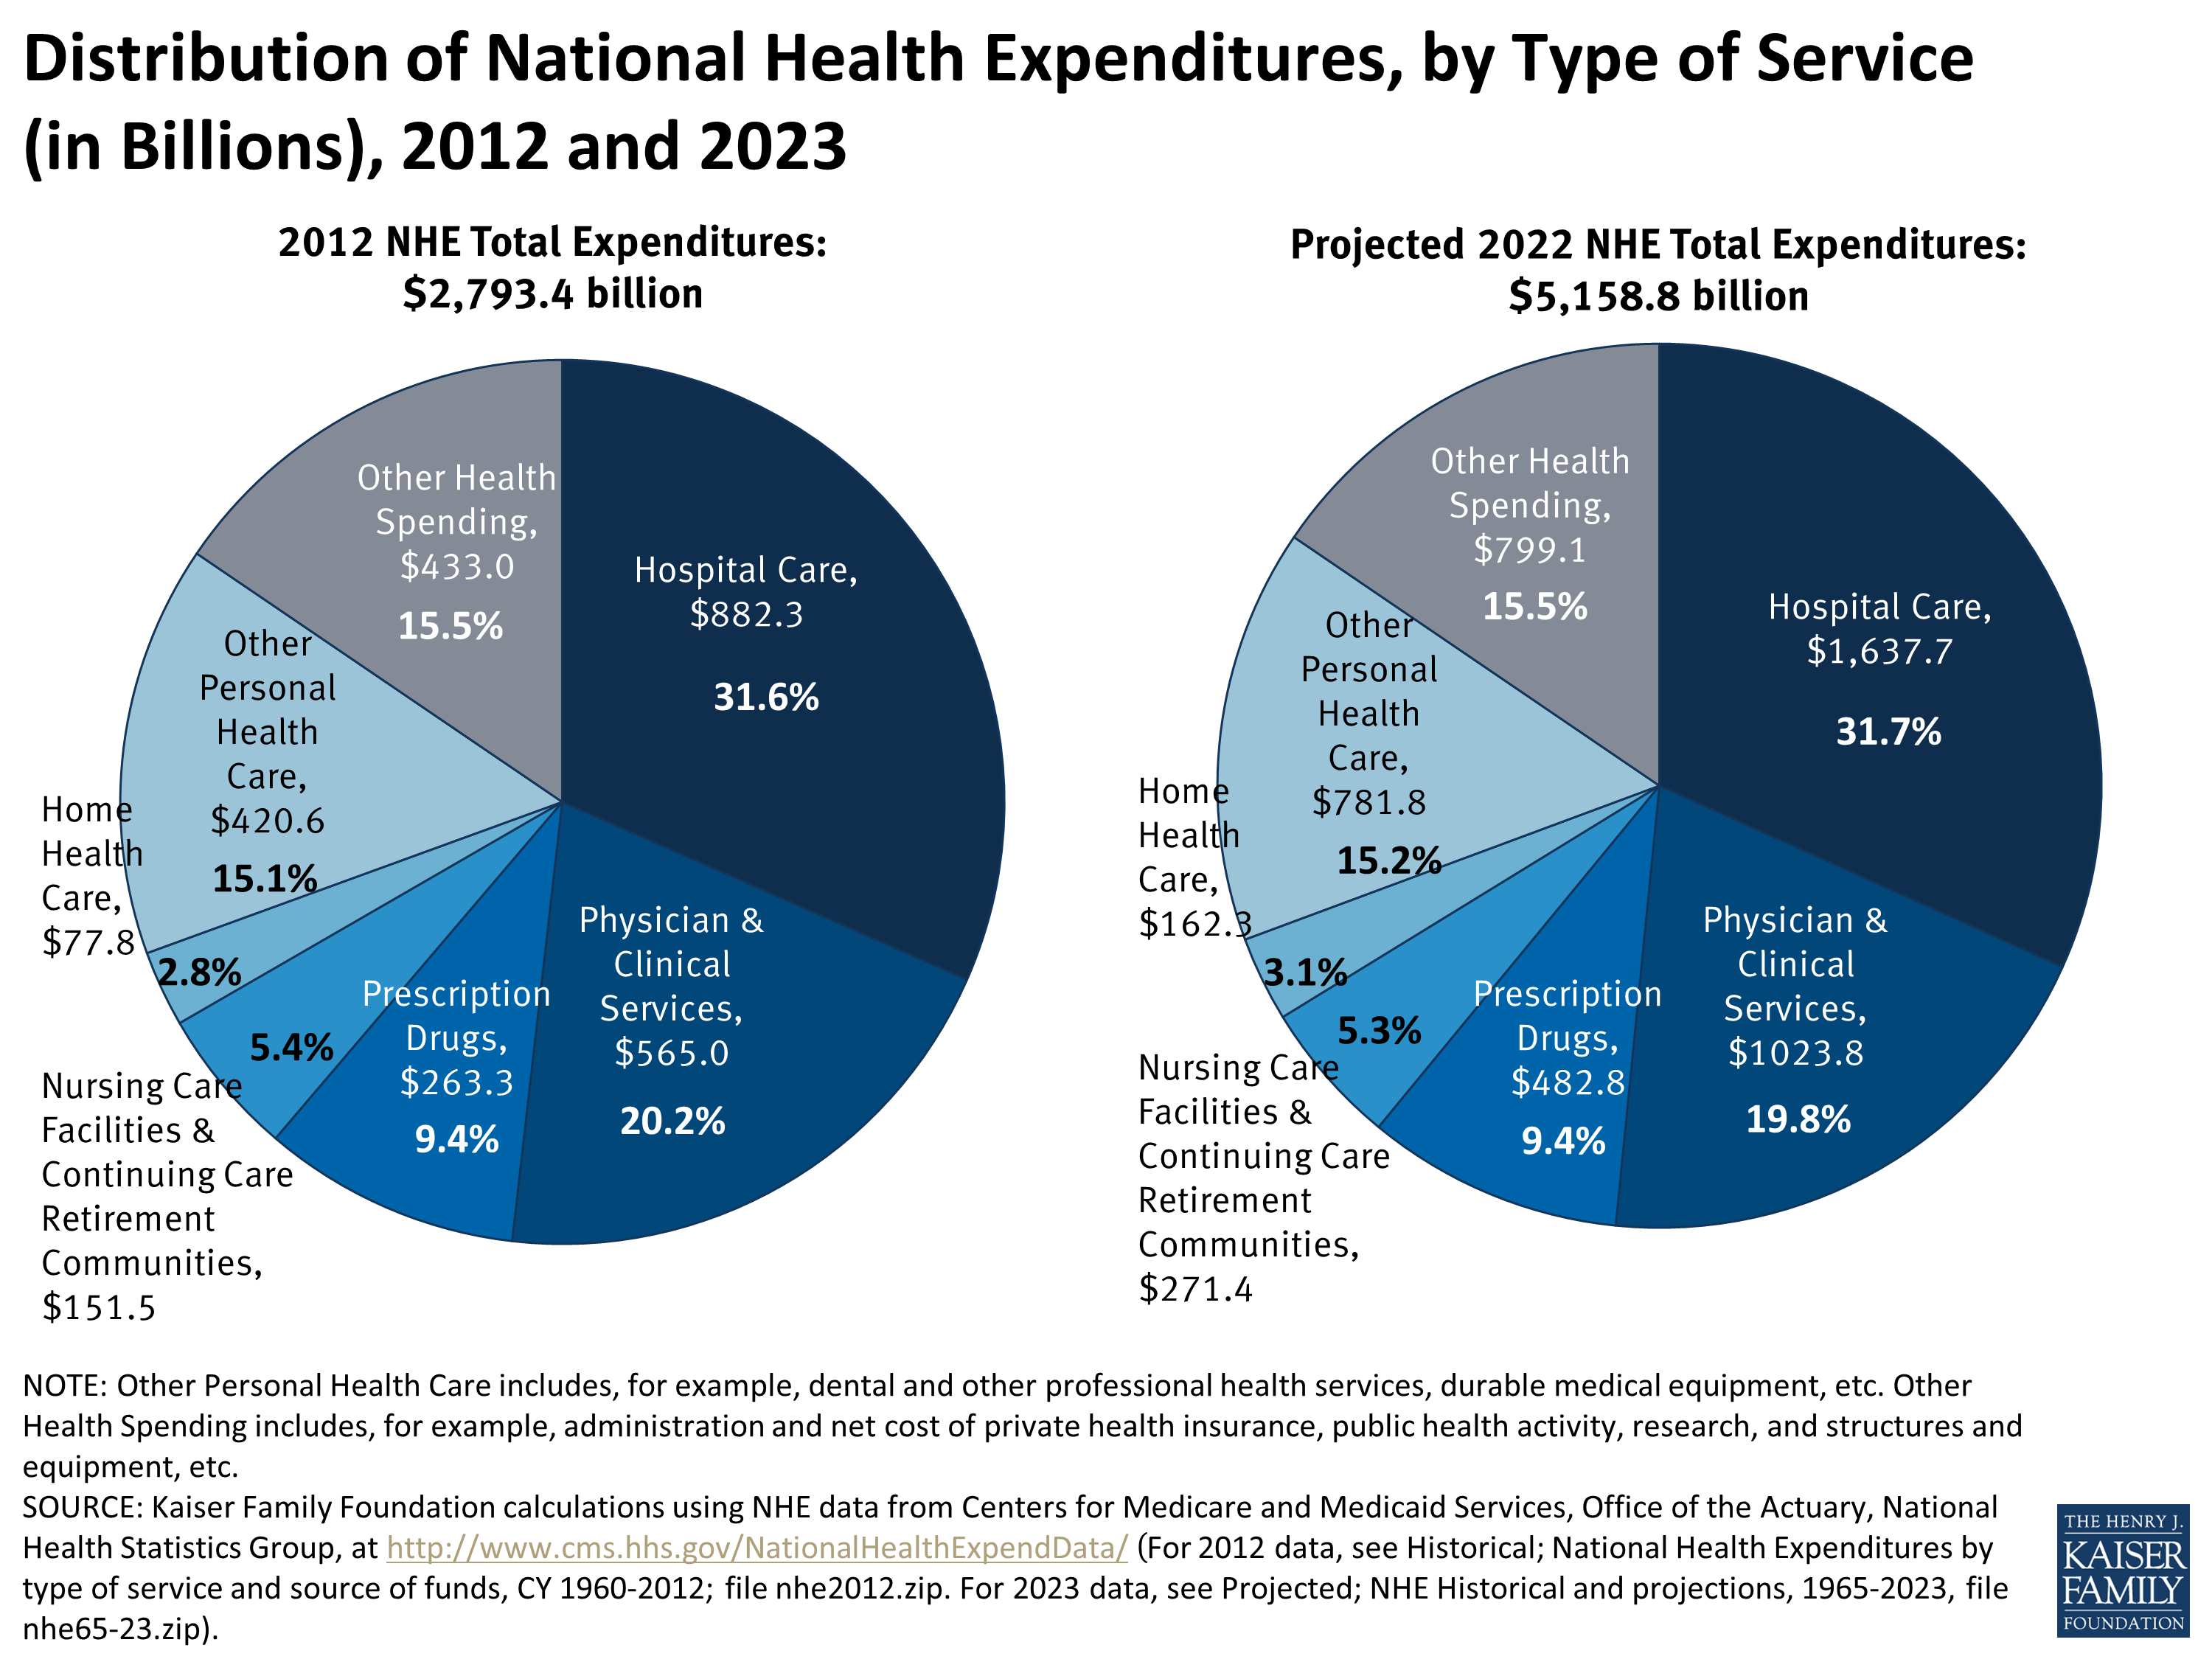 Distribution of National Health Expenditures, by Type of Service (in Billions), 2012 and 2023